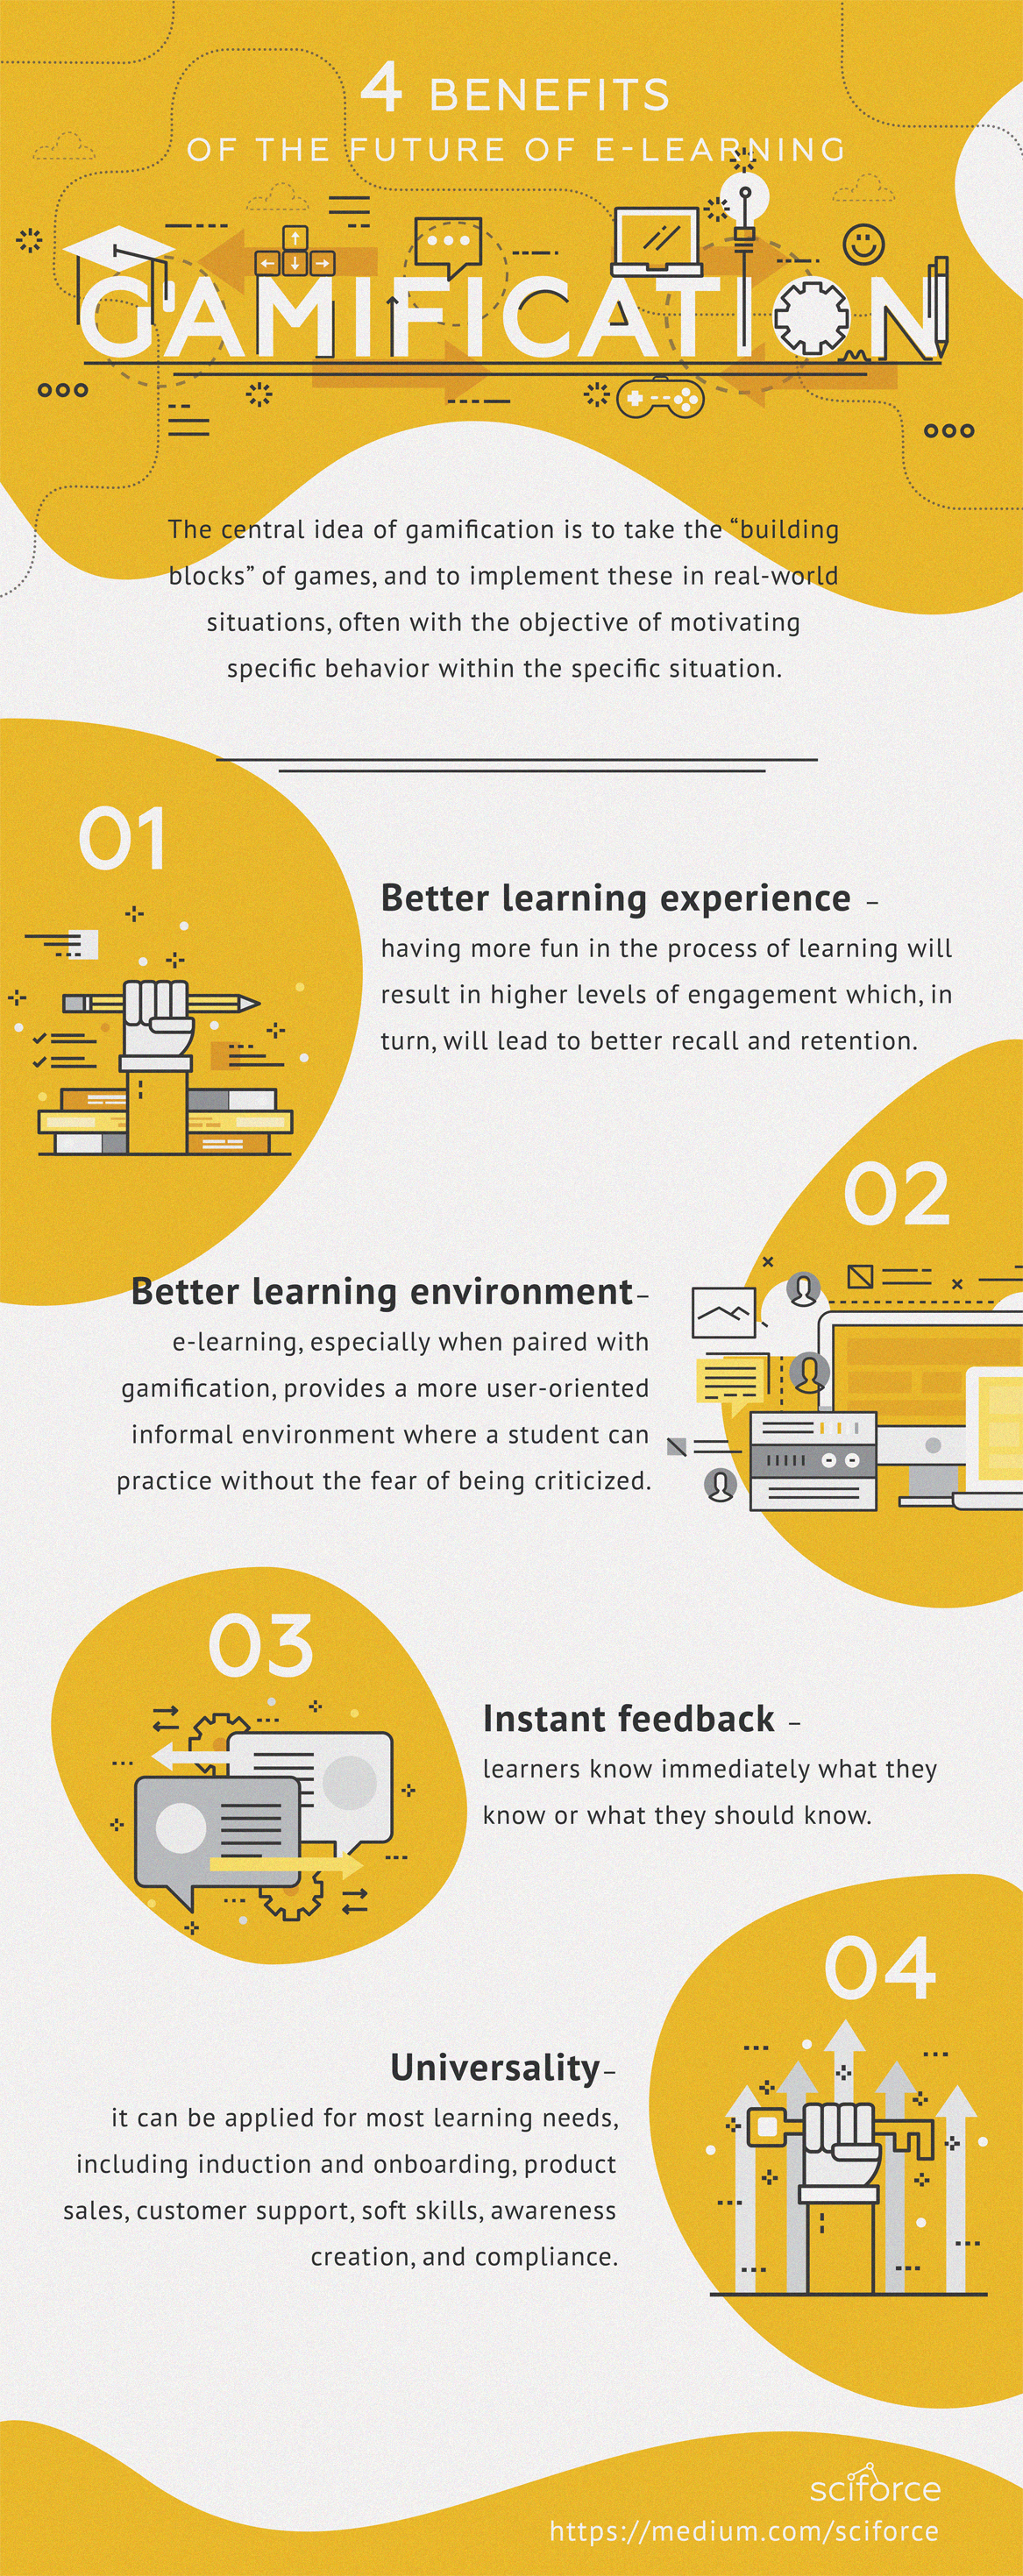 5 Key Benefits of Using Games and Simulations in E-learning [Infographic]